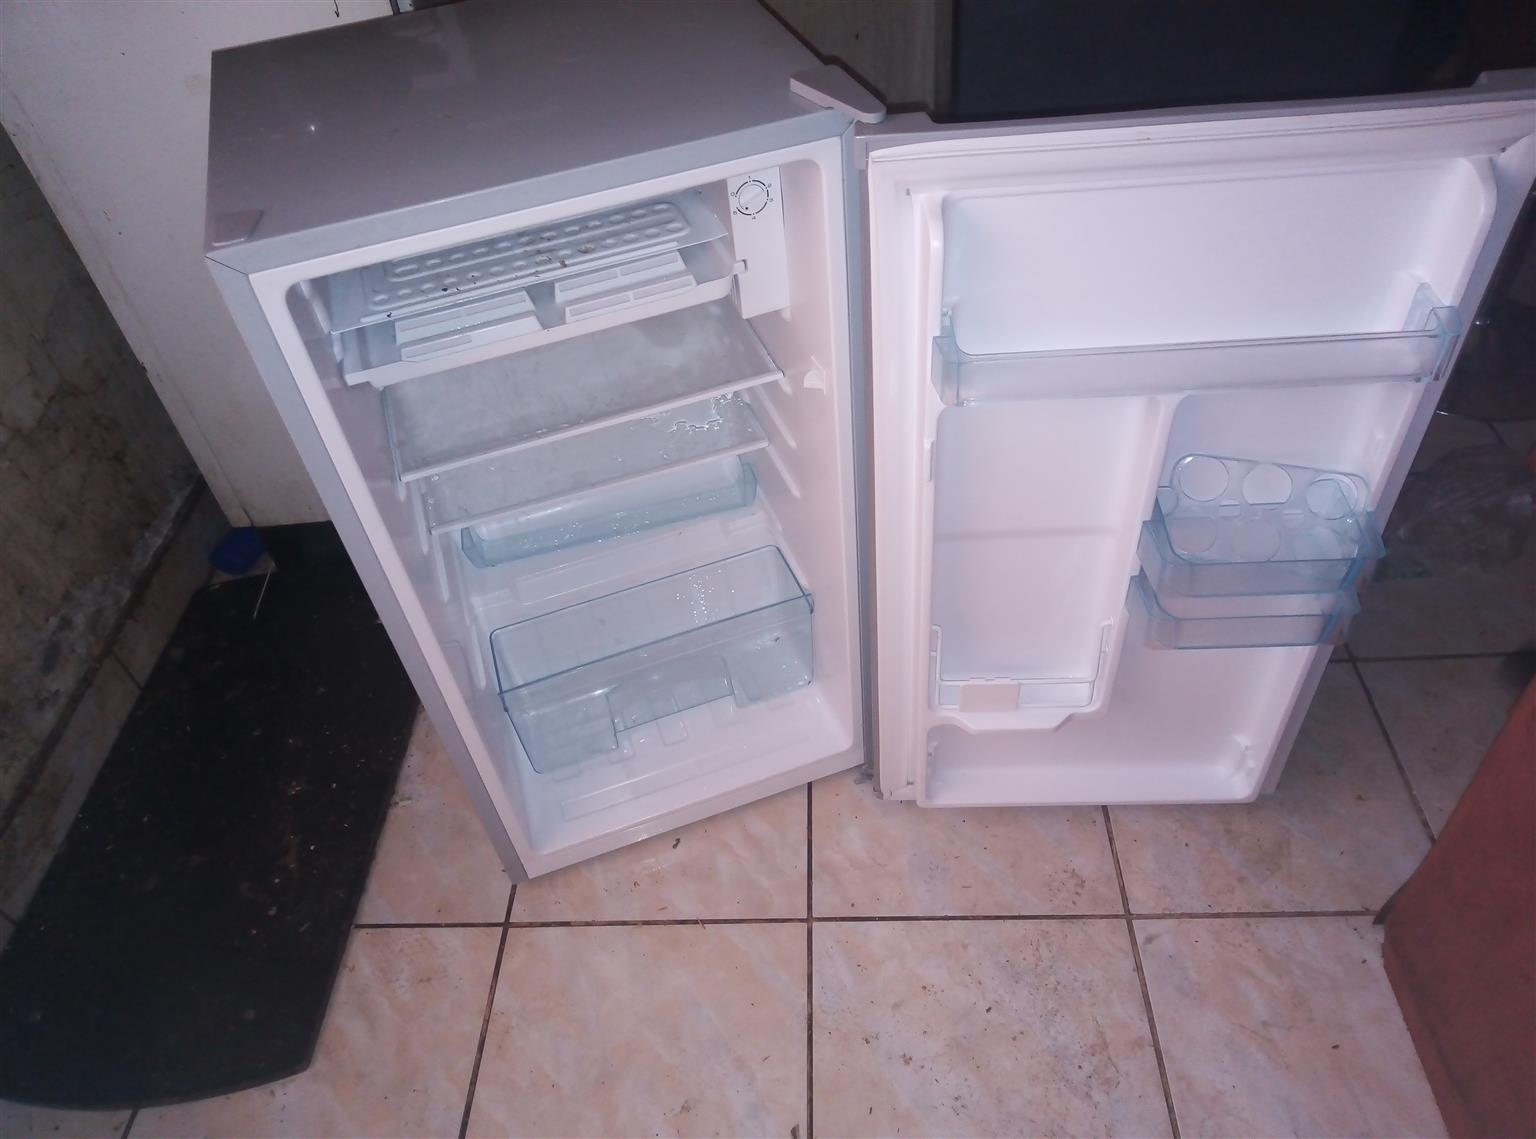 BED, FRIDGE, DISH WASHER FOR SALE IN GOOD CONDITION 0743444607